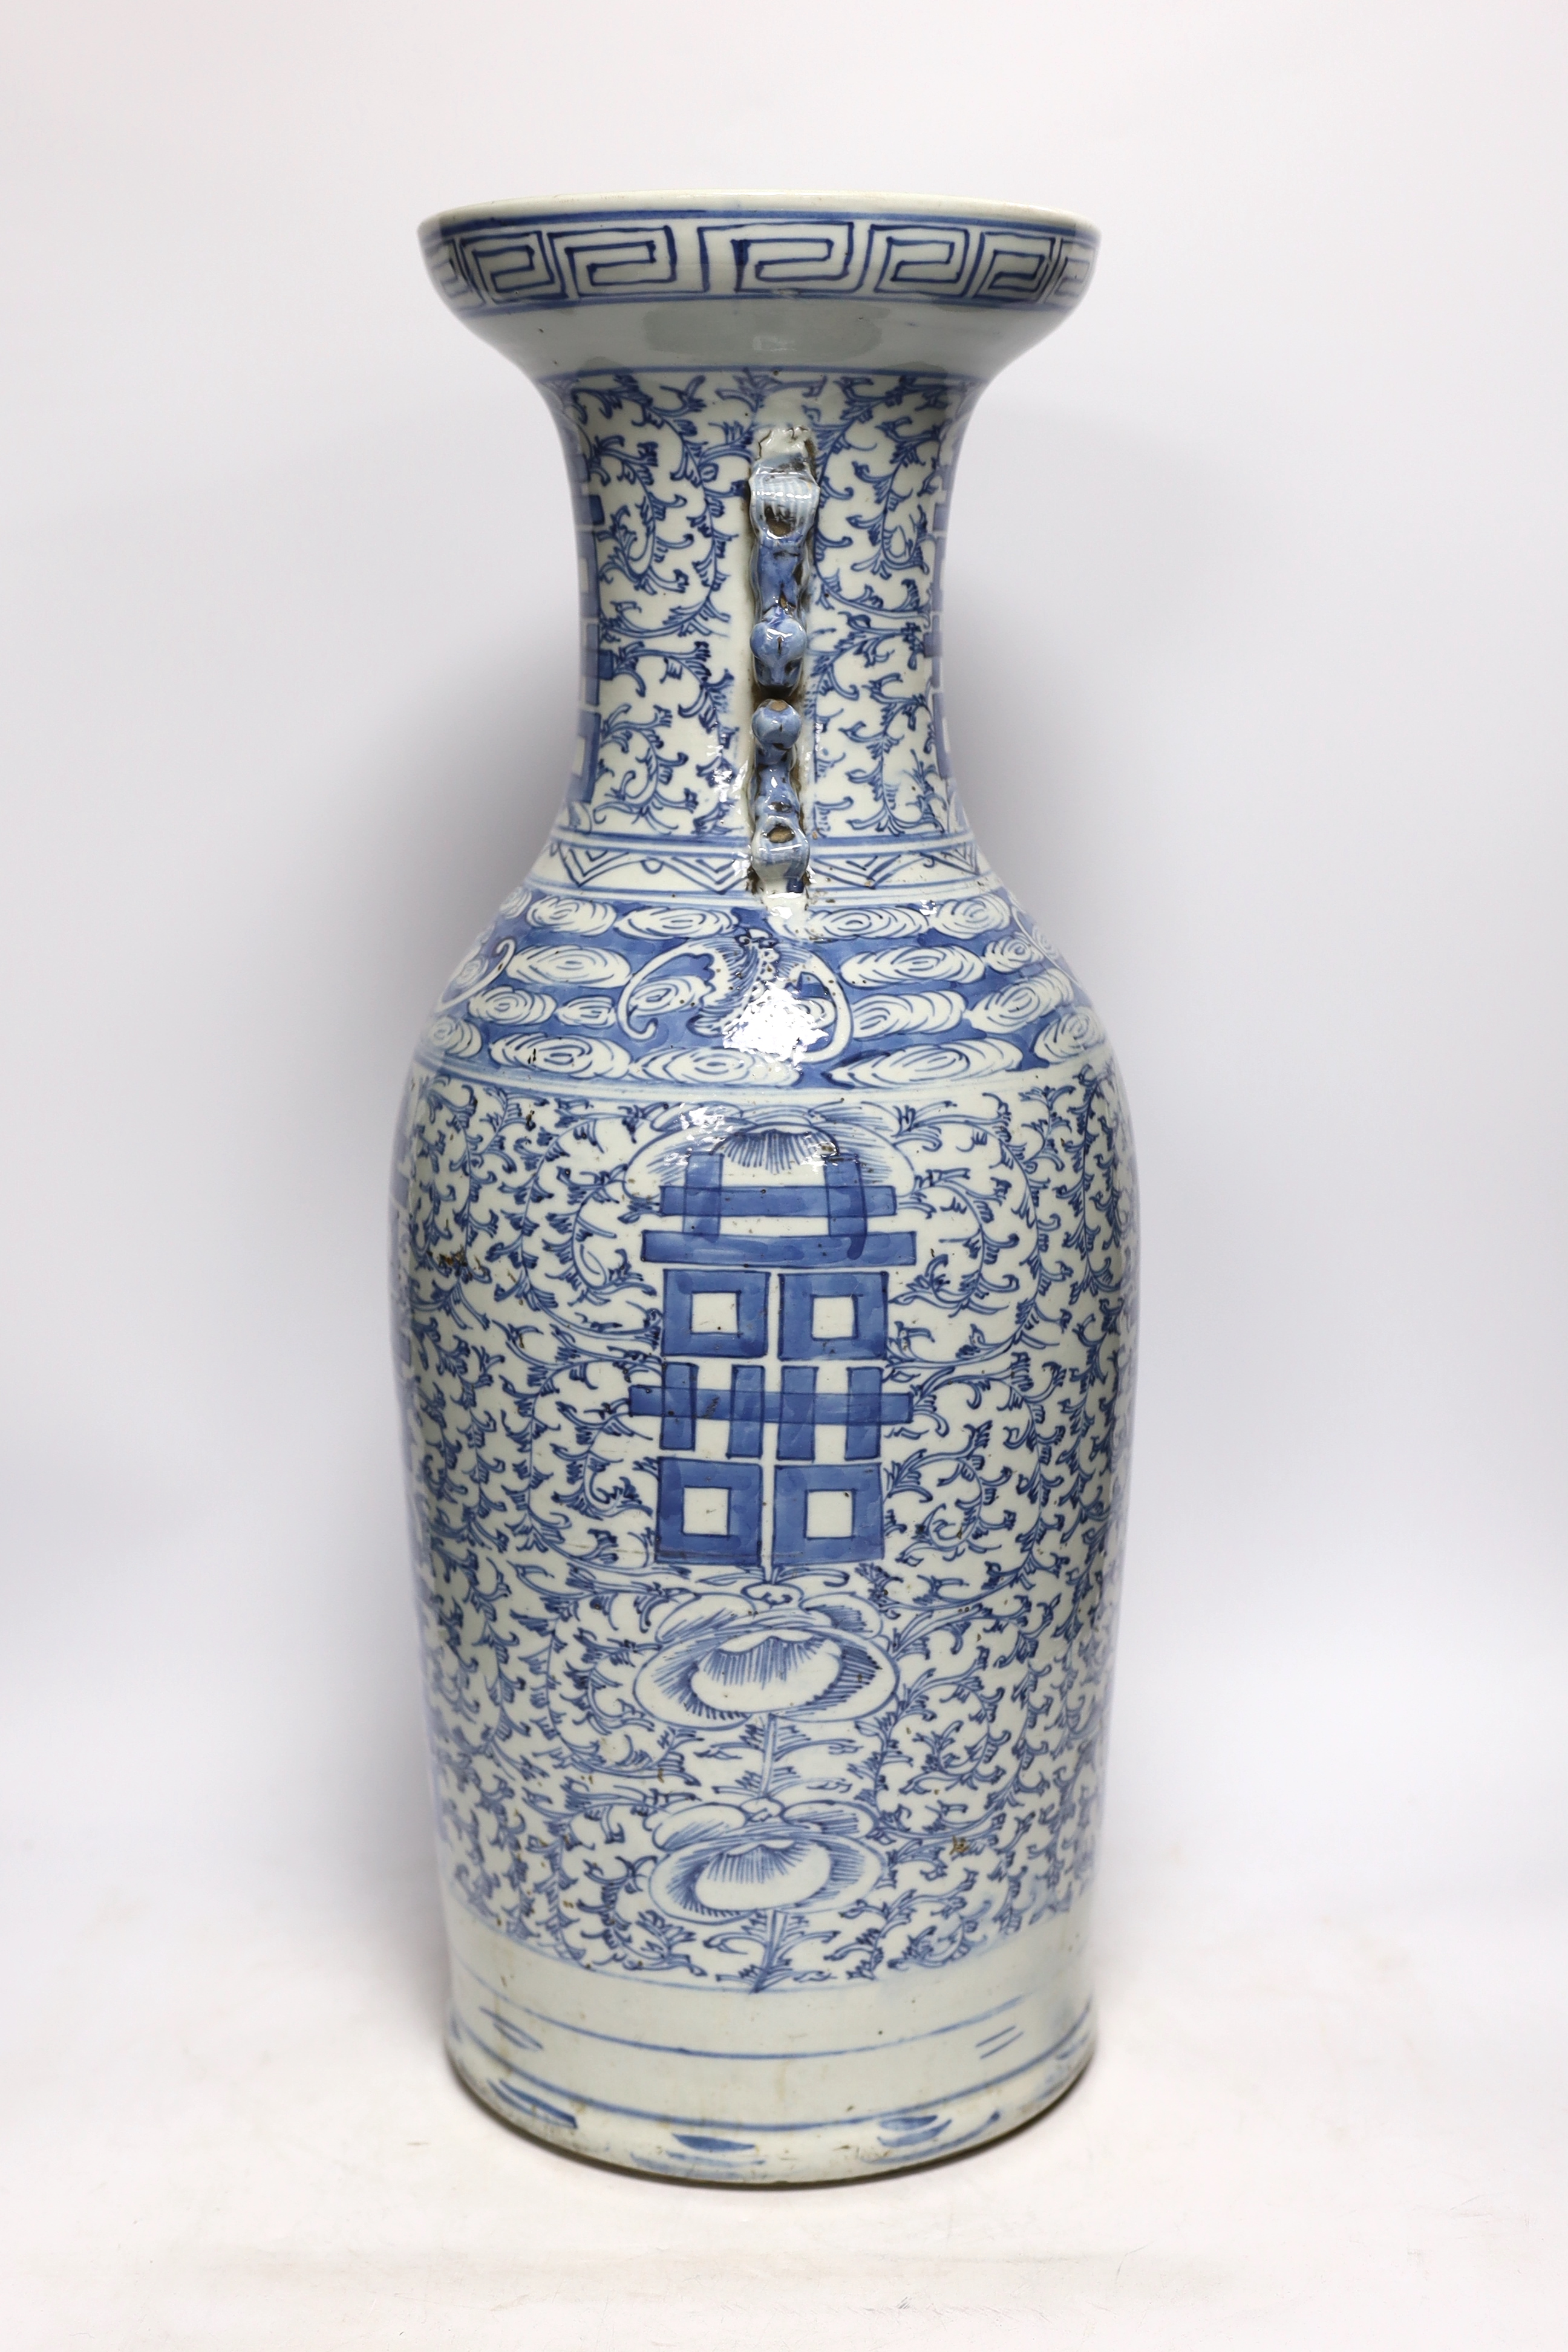 A Chinese blue and white ‘shuangxi’ baluster vase, early 20th century, 57cm high